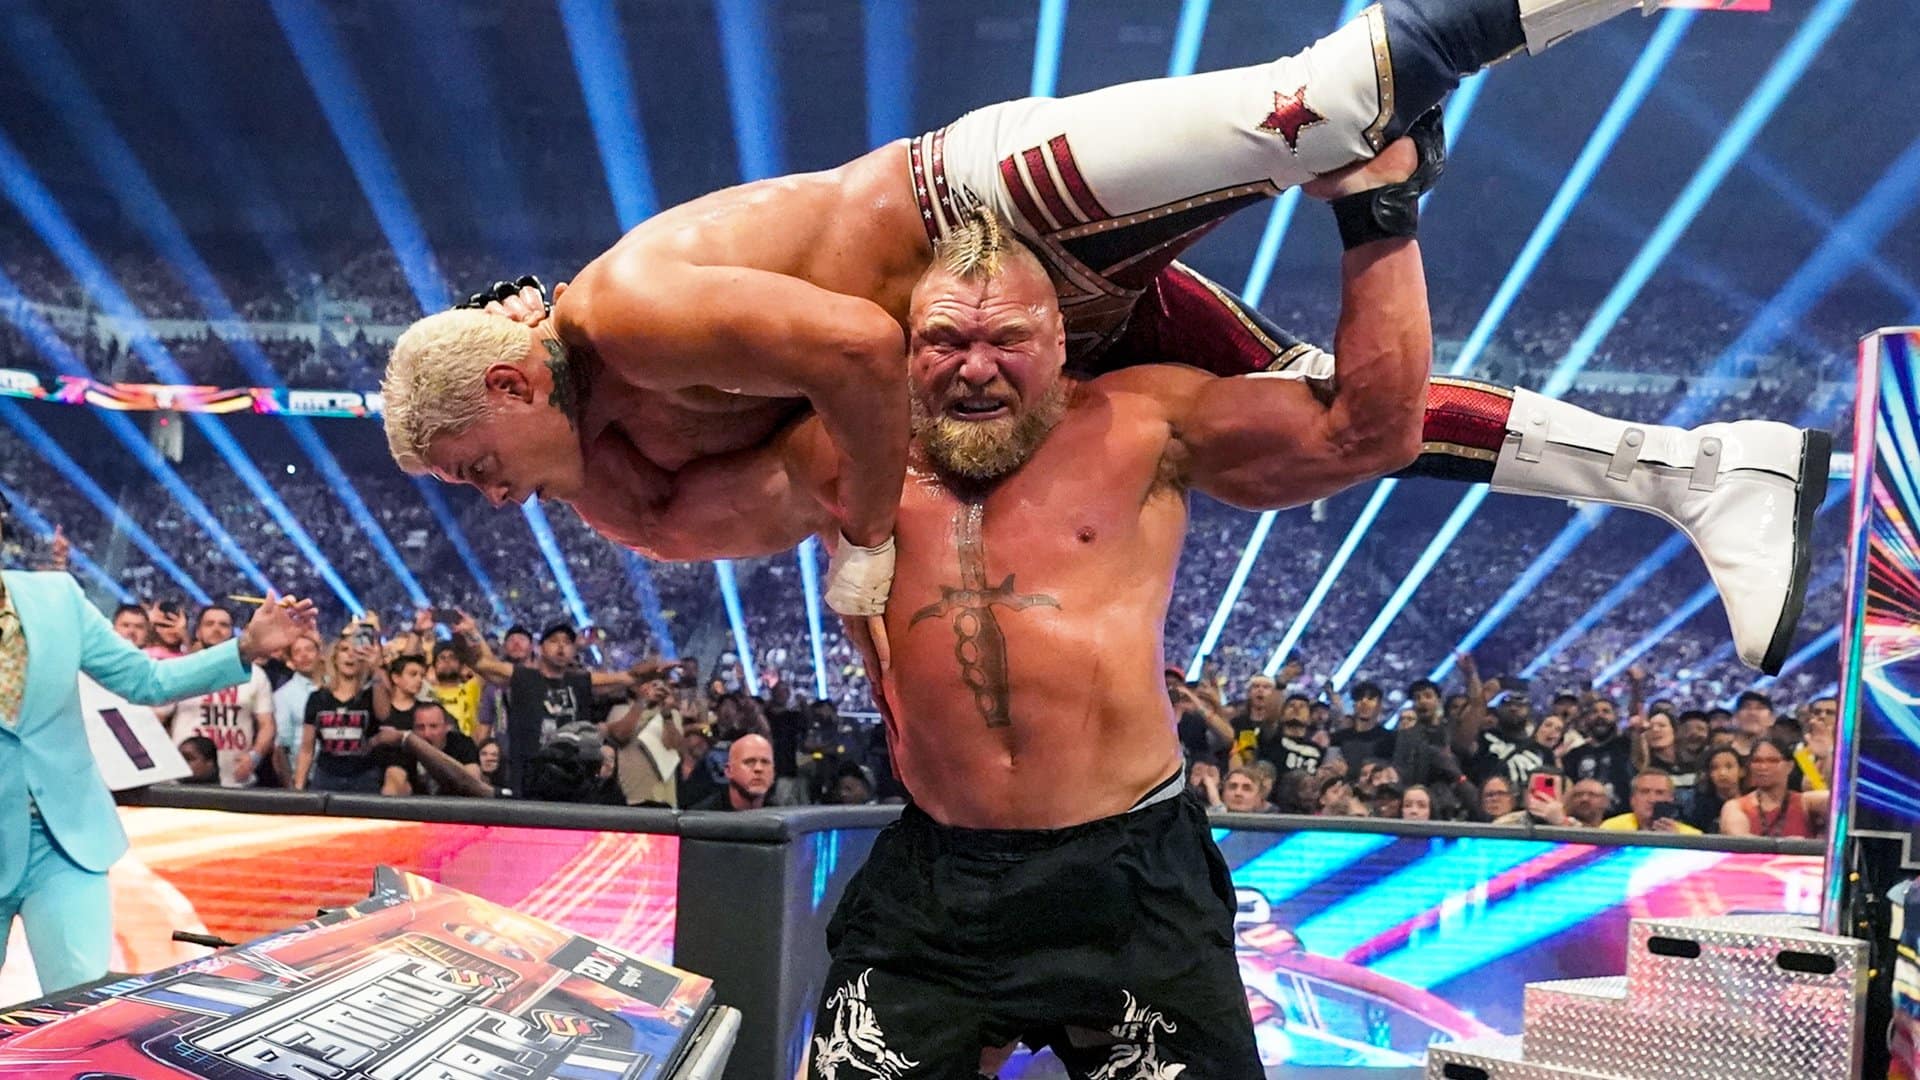 20-facts-about-wwe-summerslam